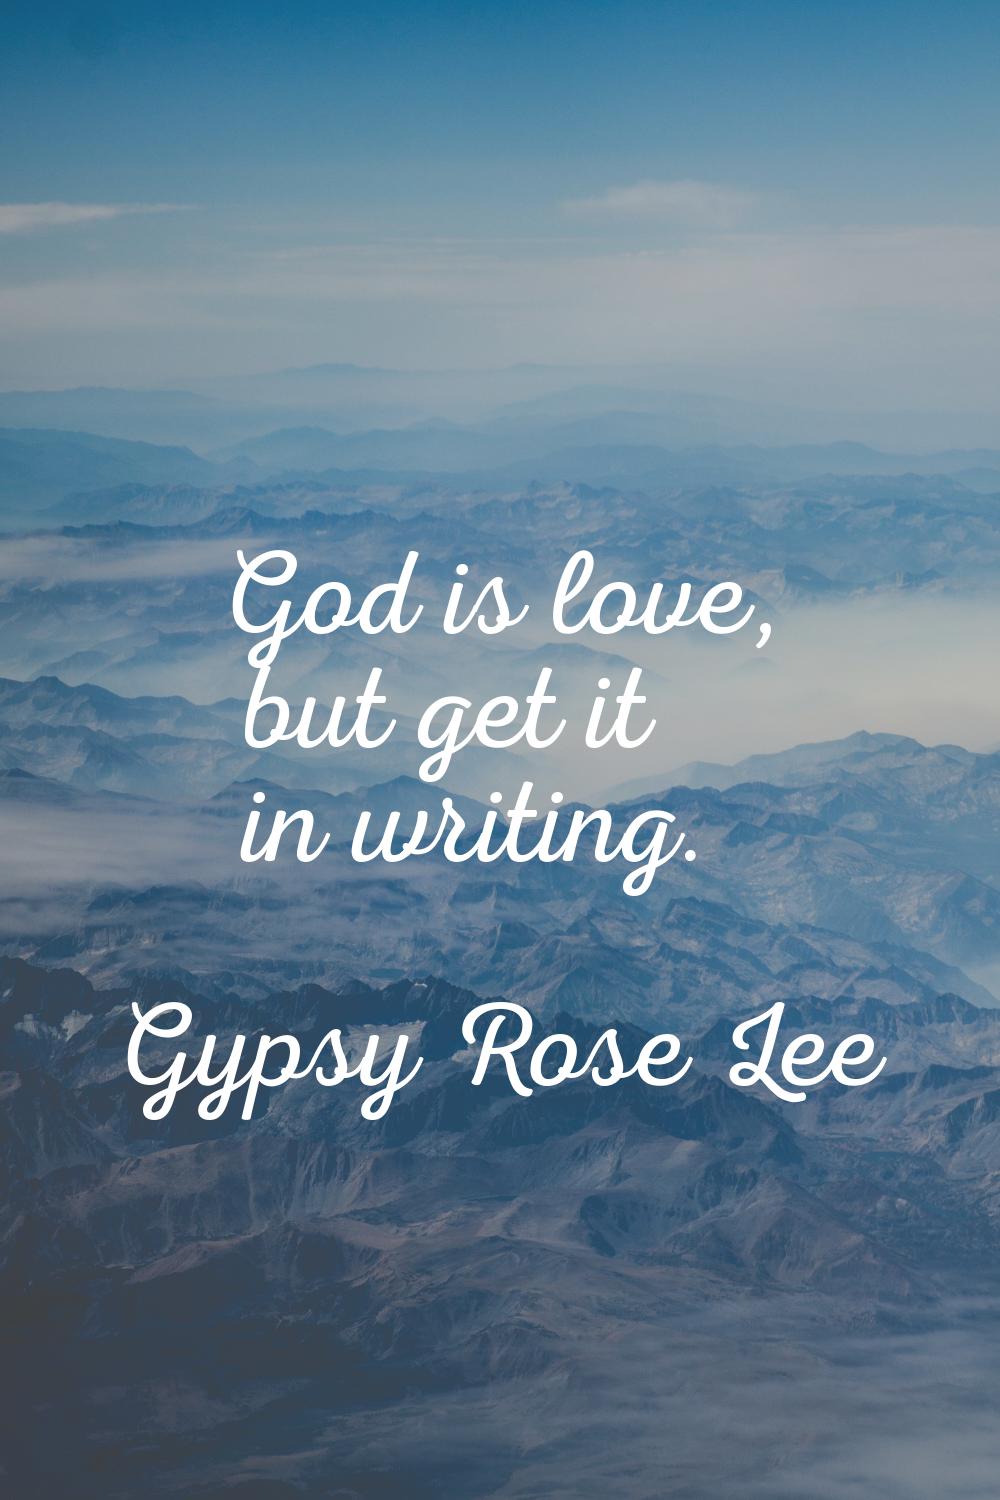 God is love, but get it in writing.